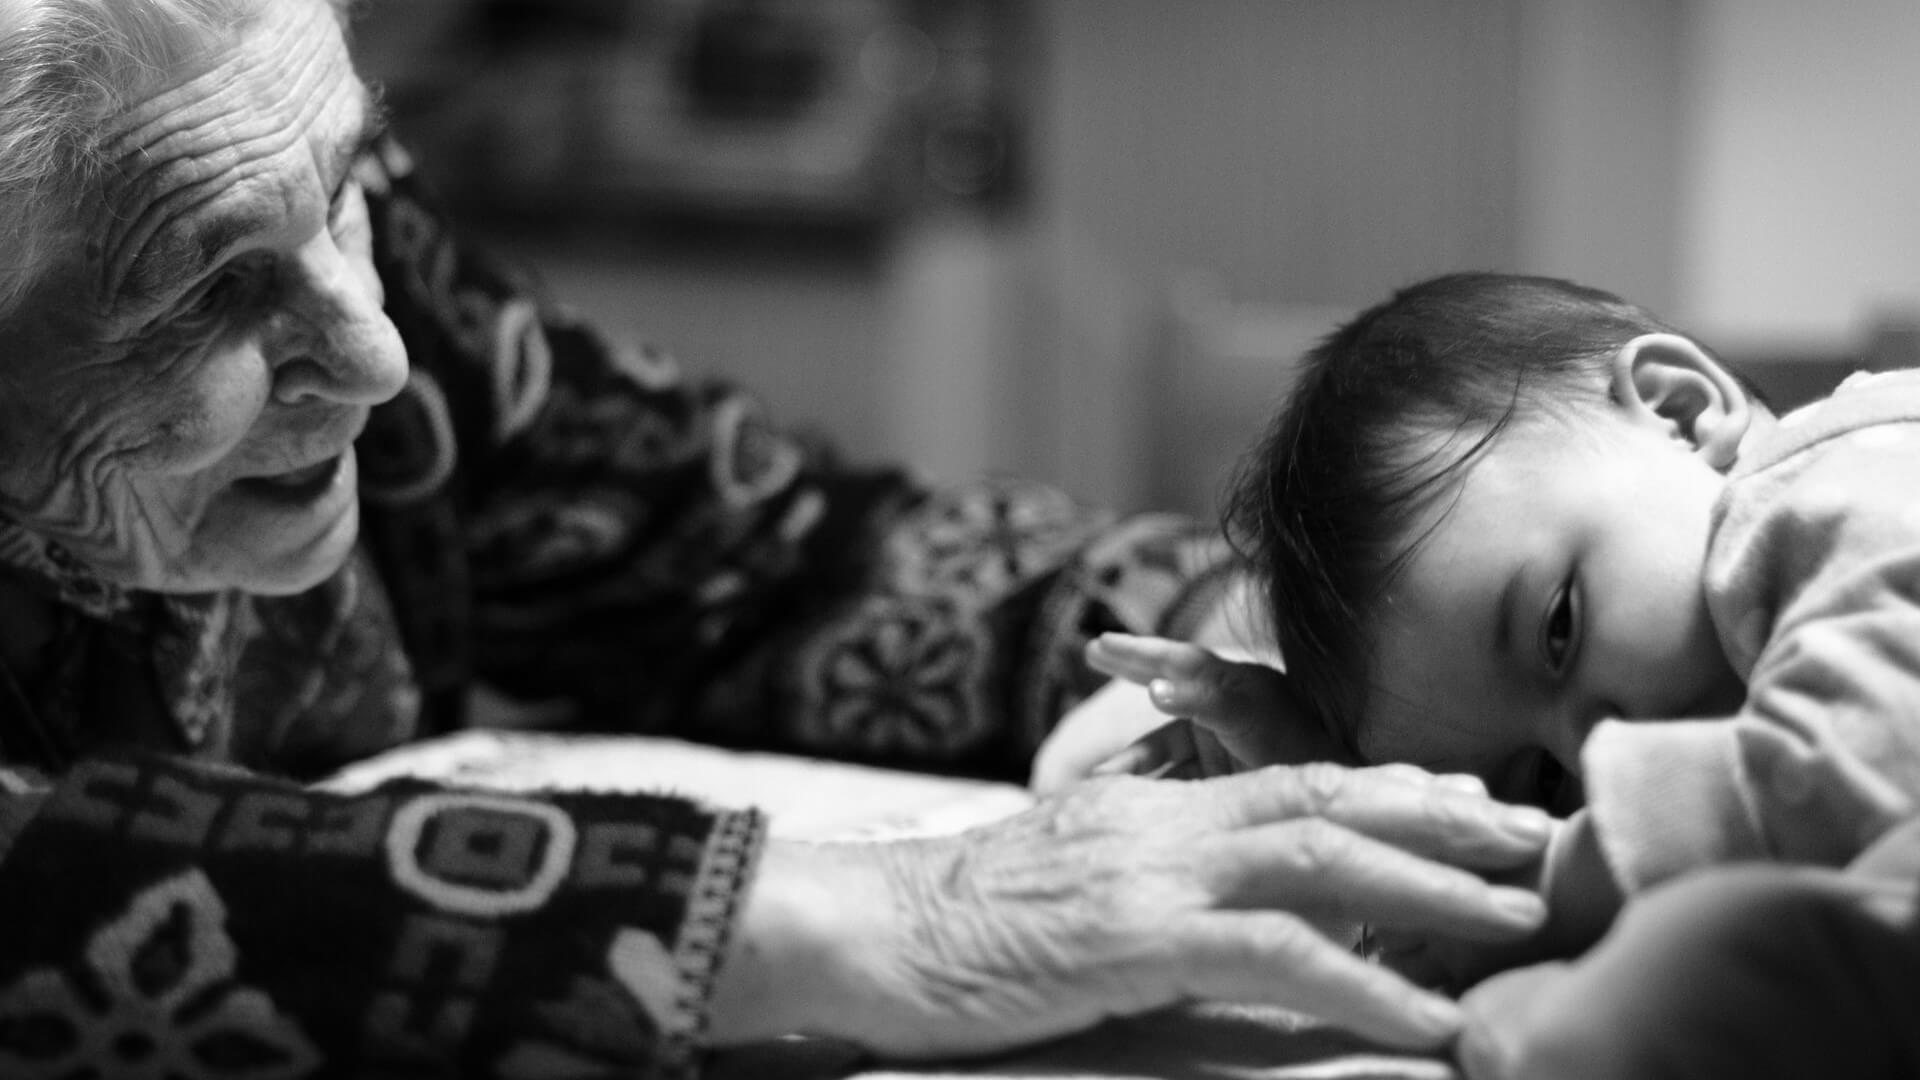 elderly woman reaches toward infant lying down; close up, black and white